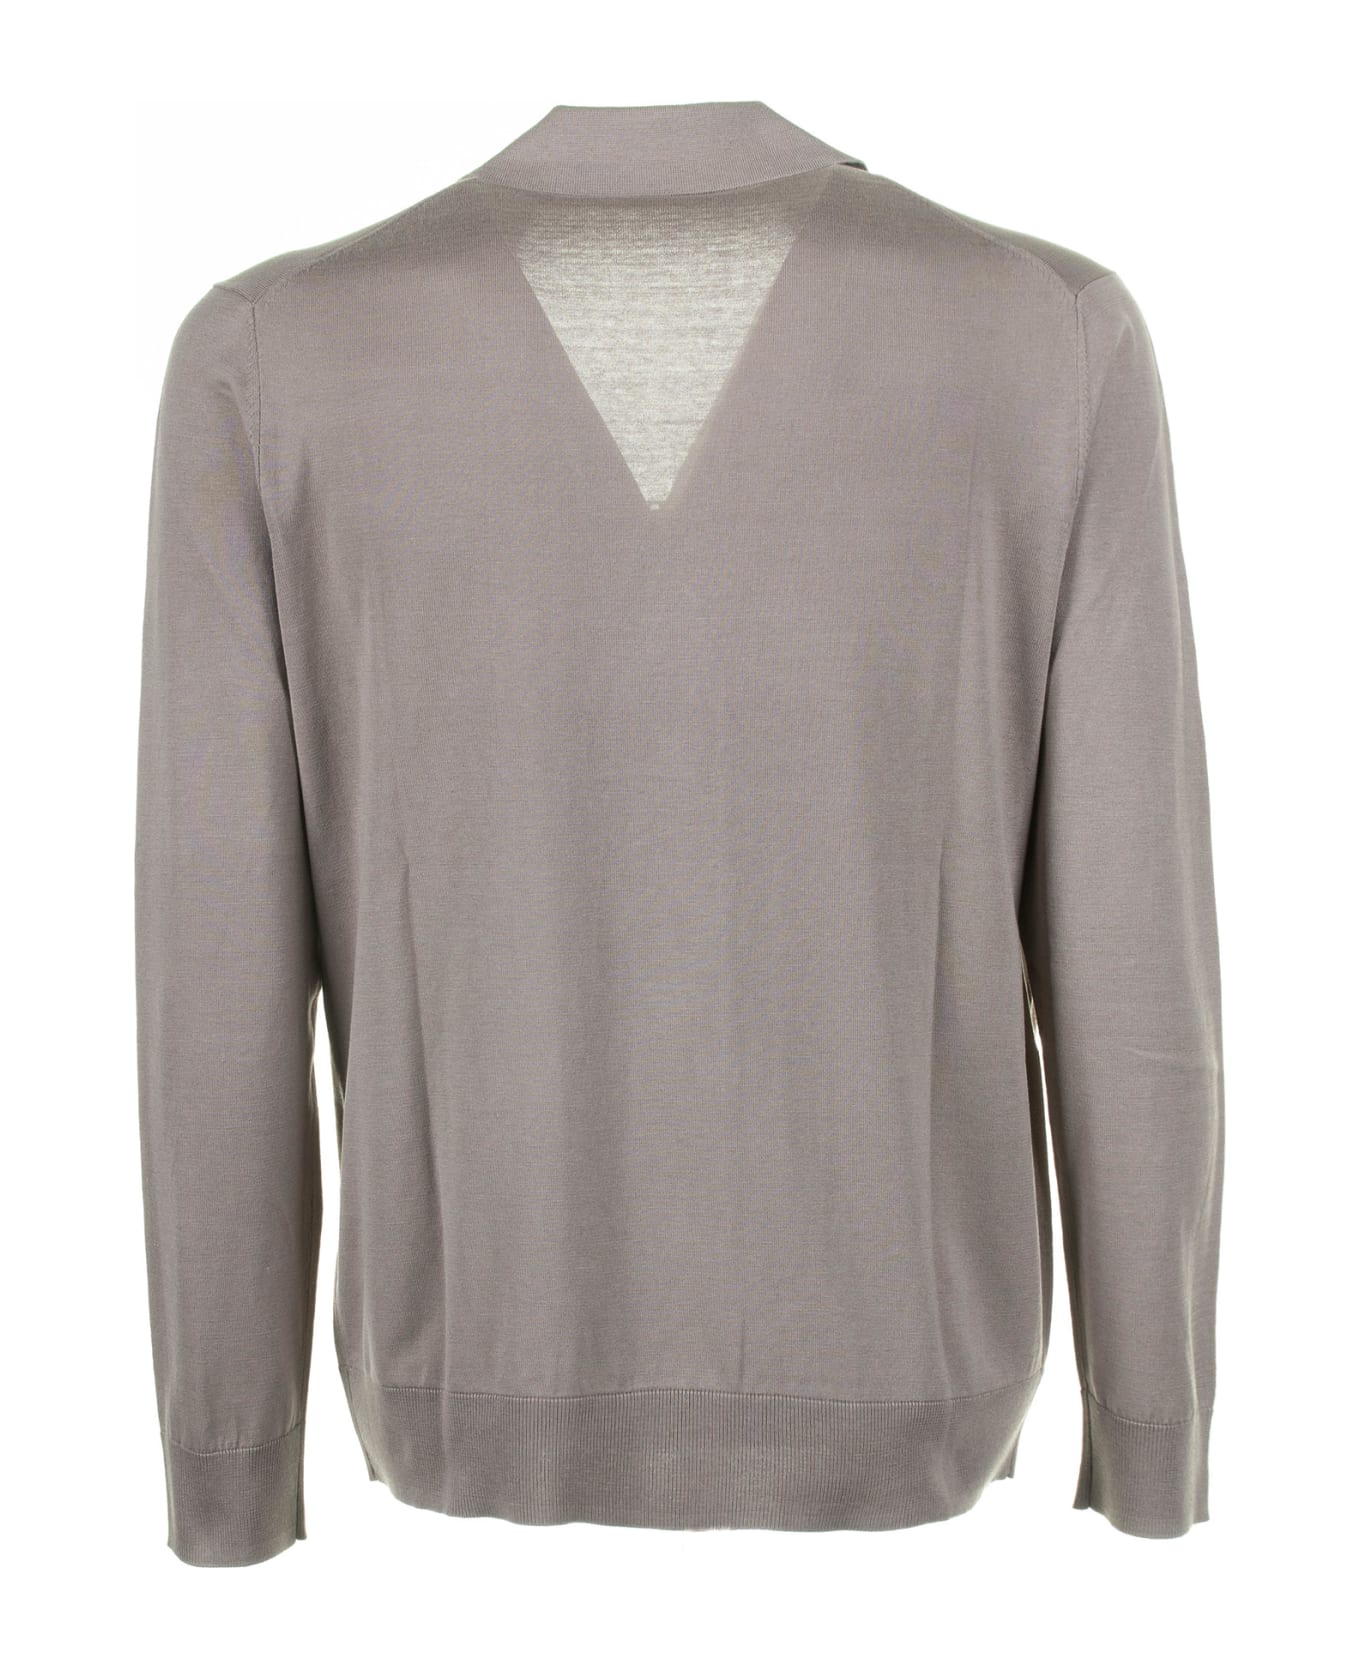 Paolo Pecora Dove Gray Cardigan With Pockets And Buttons - TORTORA